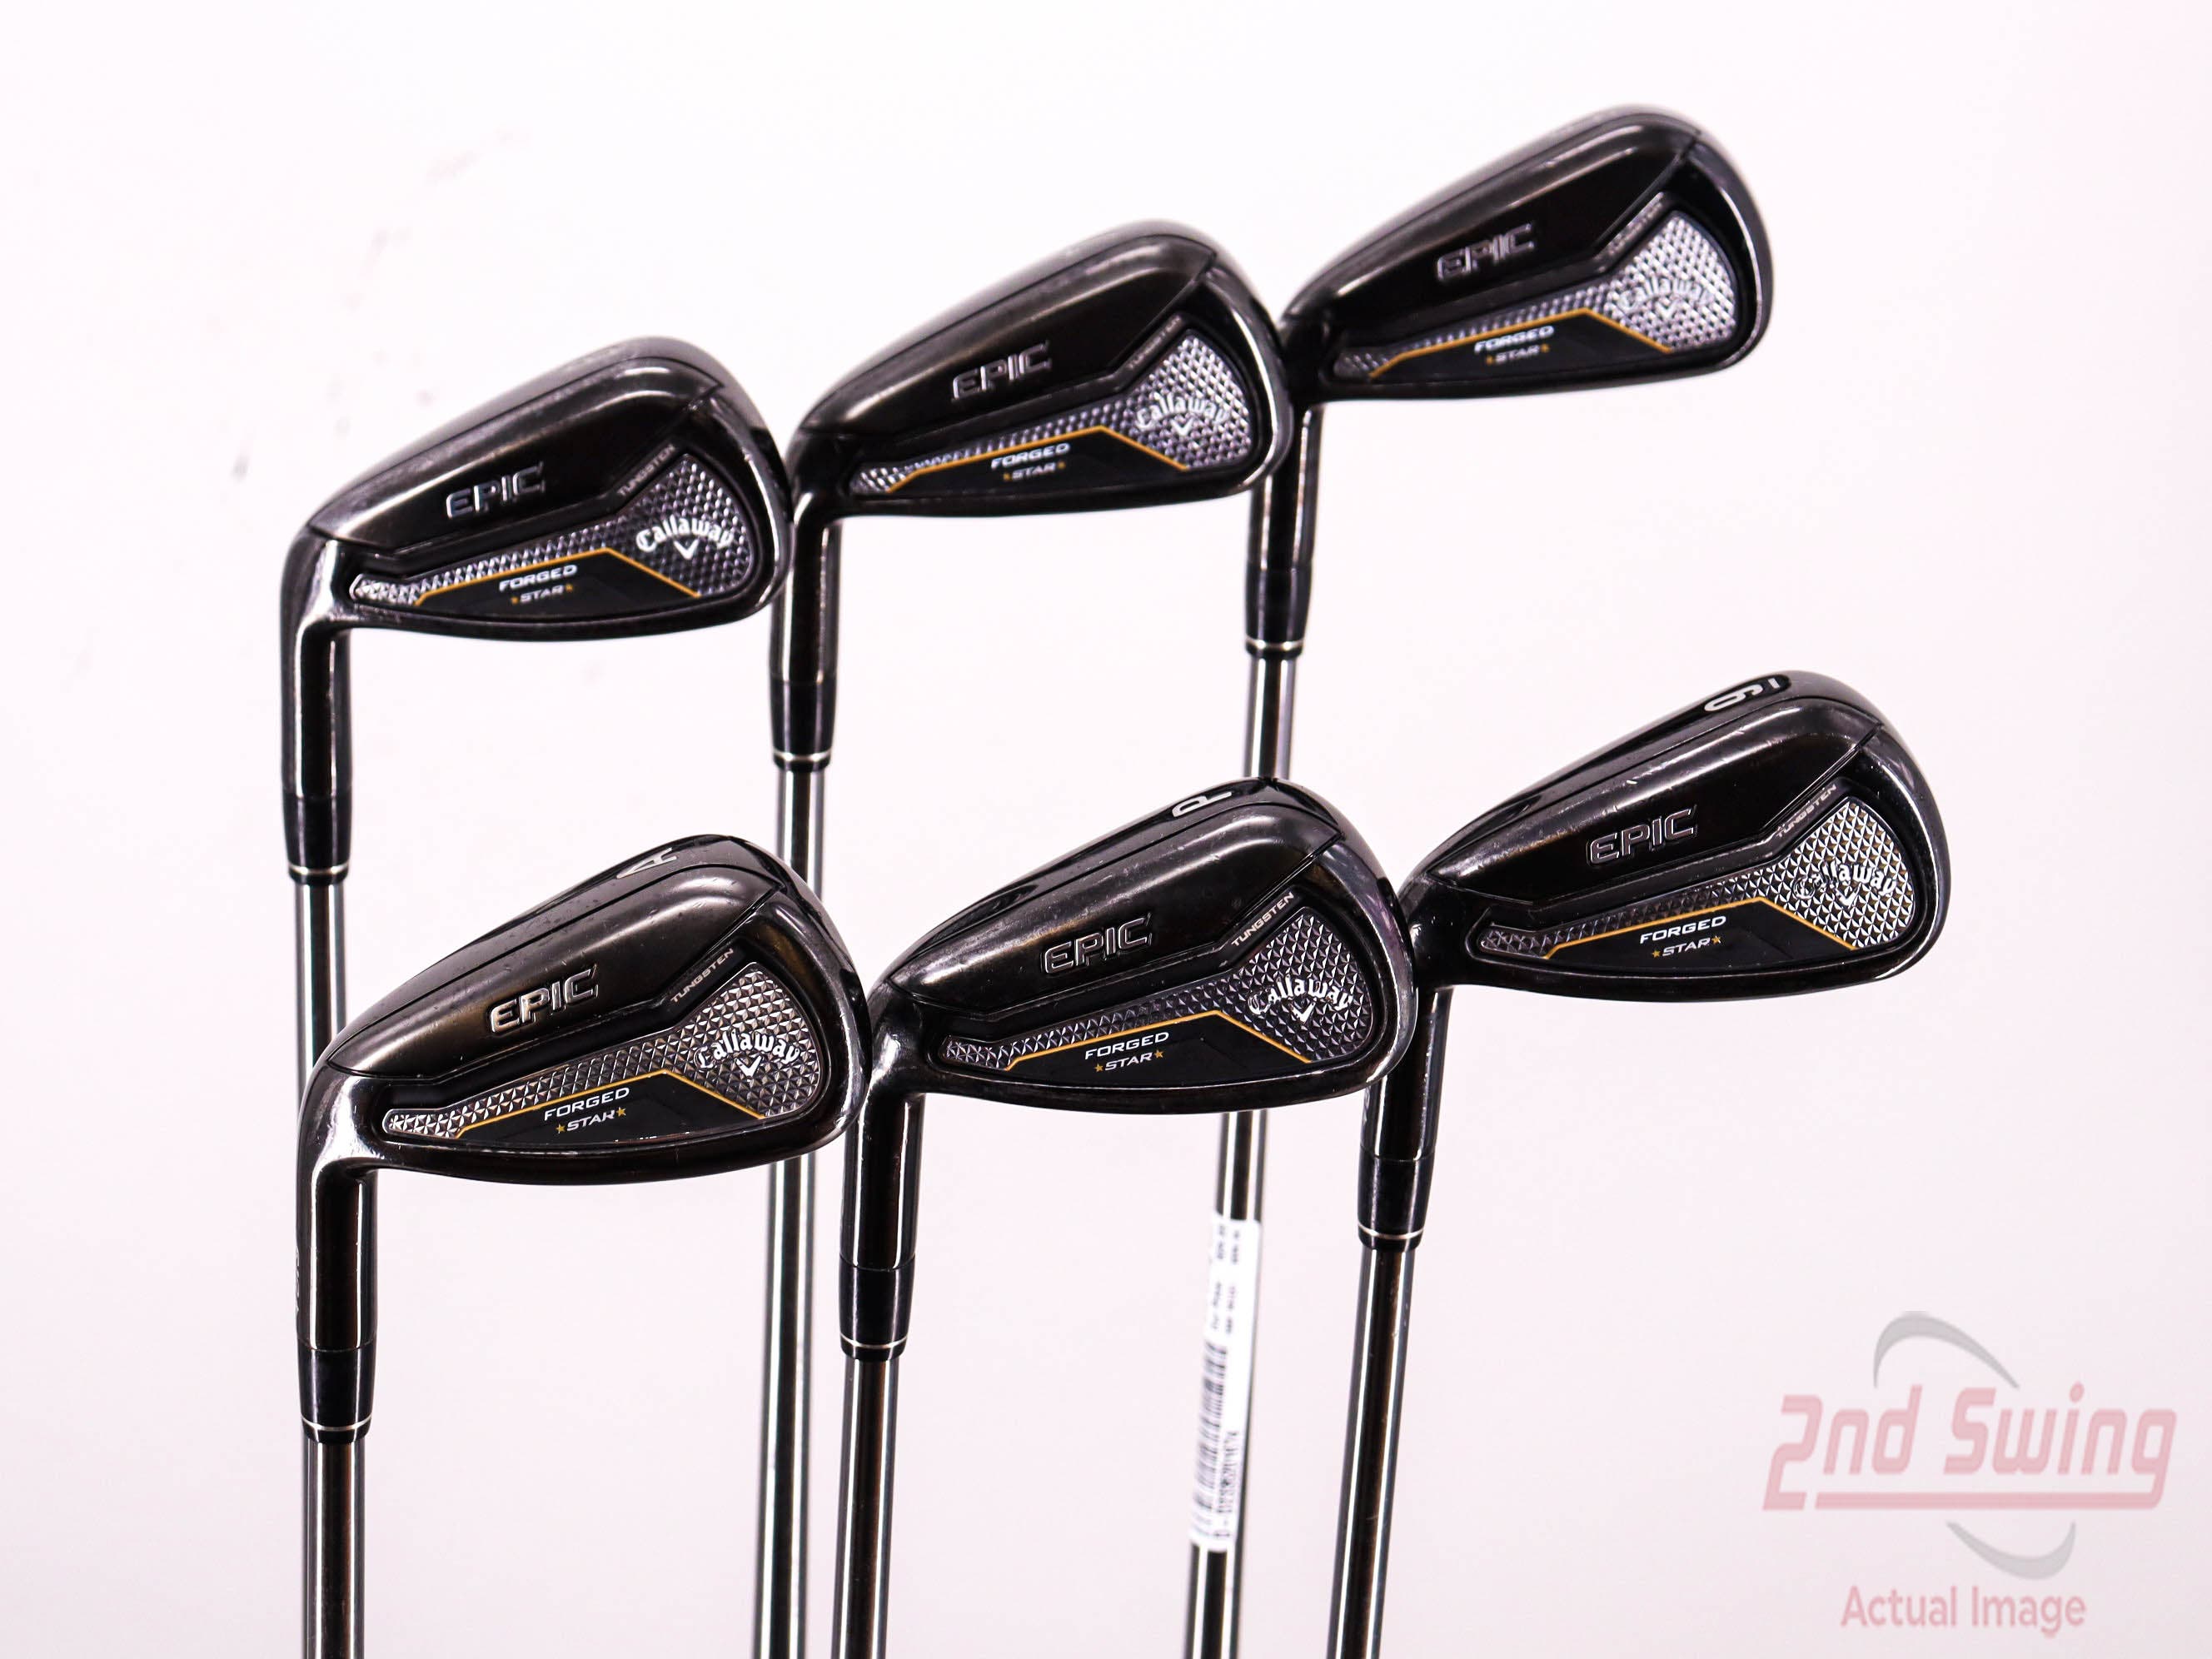 Callaway EPIC Forged Star Iron Set | 2nd Swing Golf